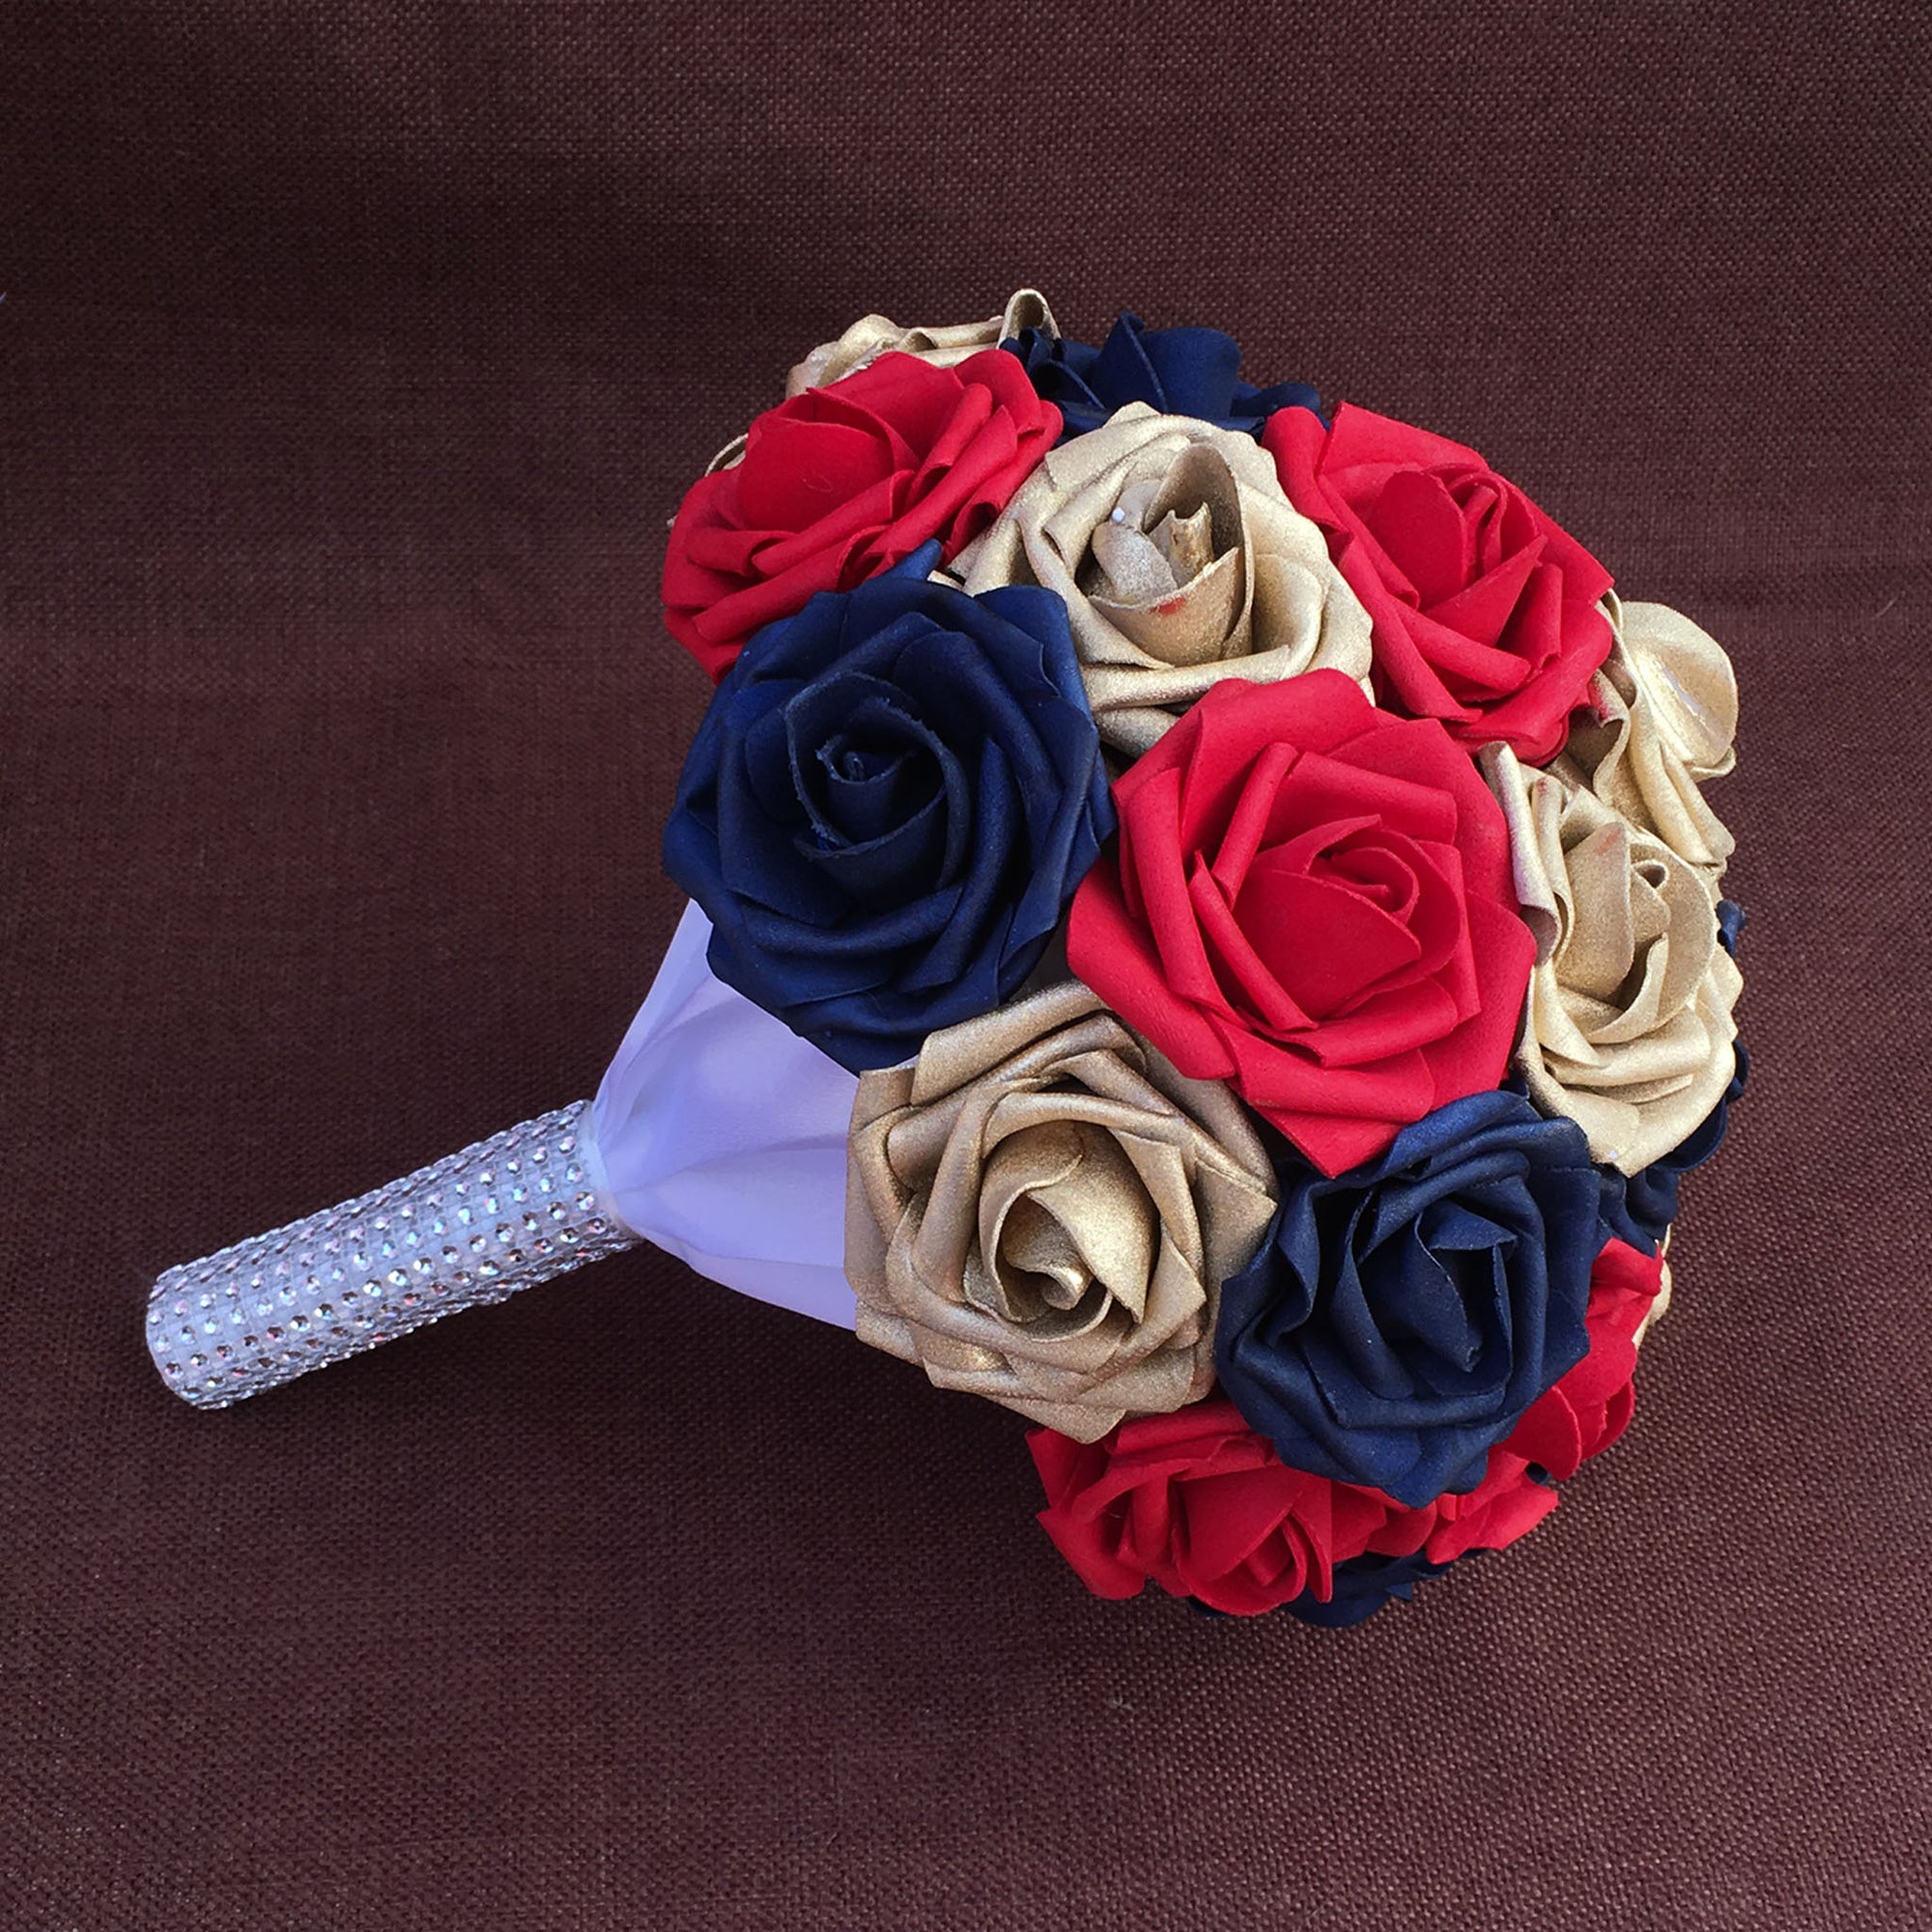 Navy Blue Gold Red Artificial Flower Bouquet for Bridesmaids